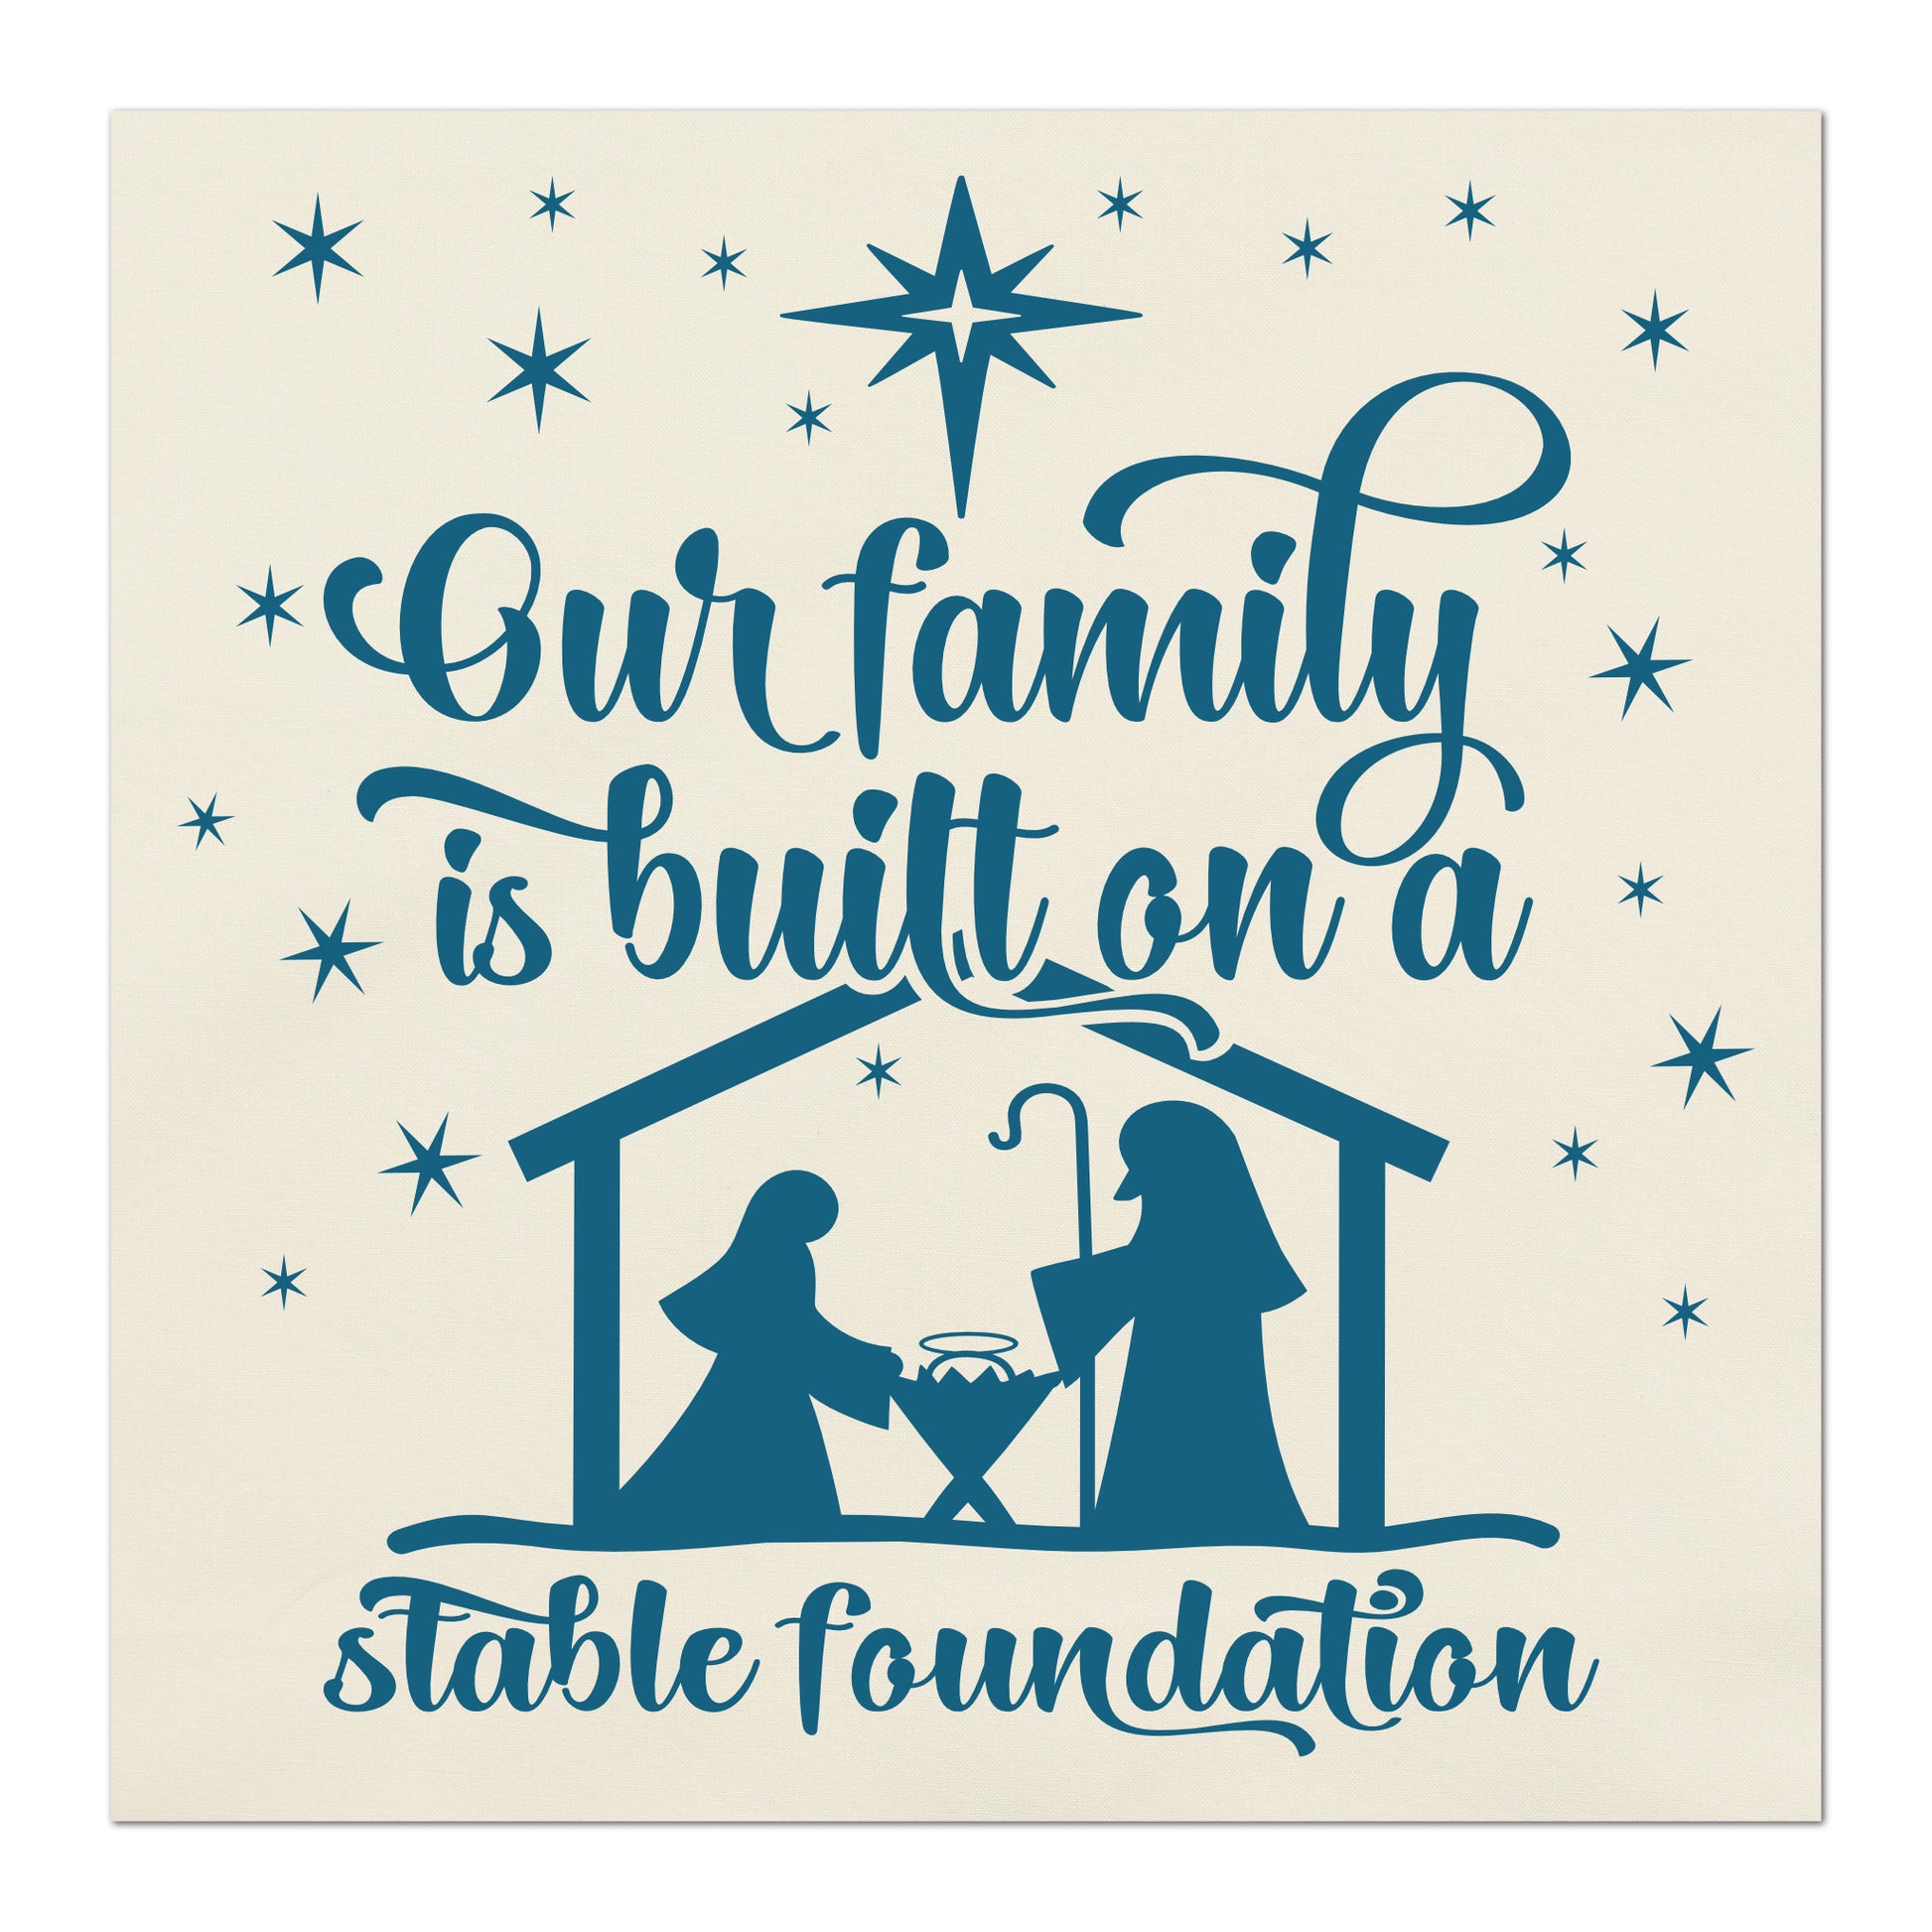 Nativity Scene, Our Family is built on a stable foundation - Christmas Fabric Panels, Quilt Block